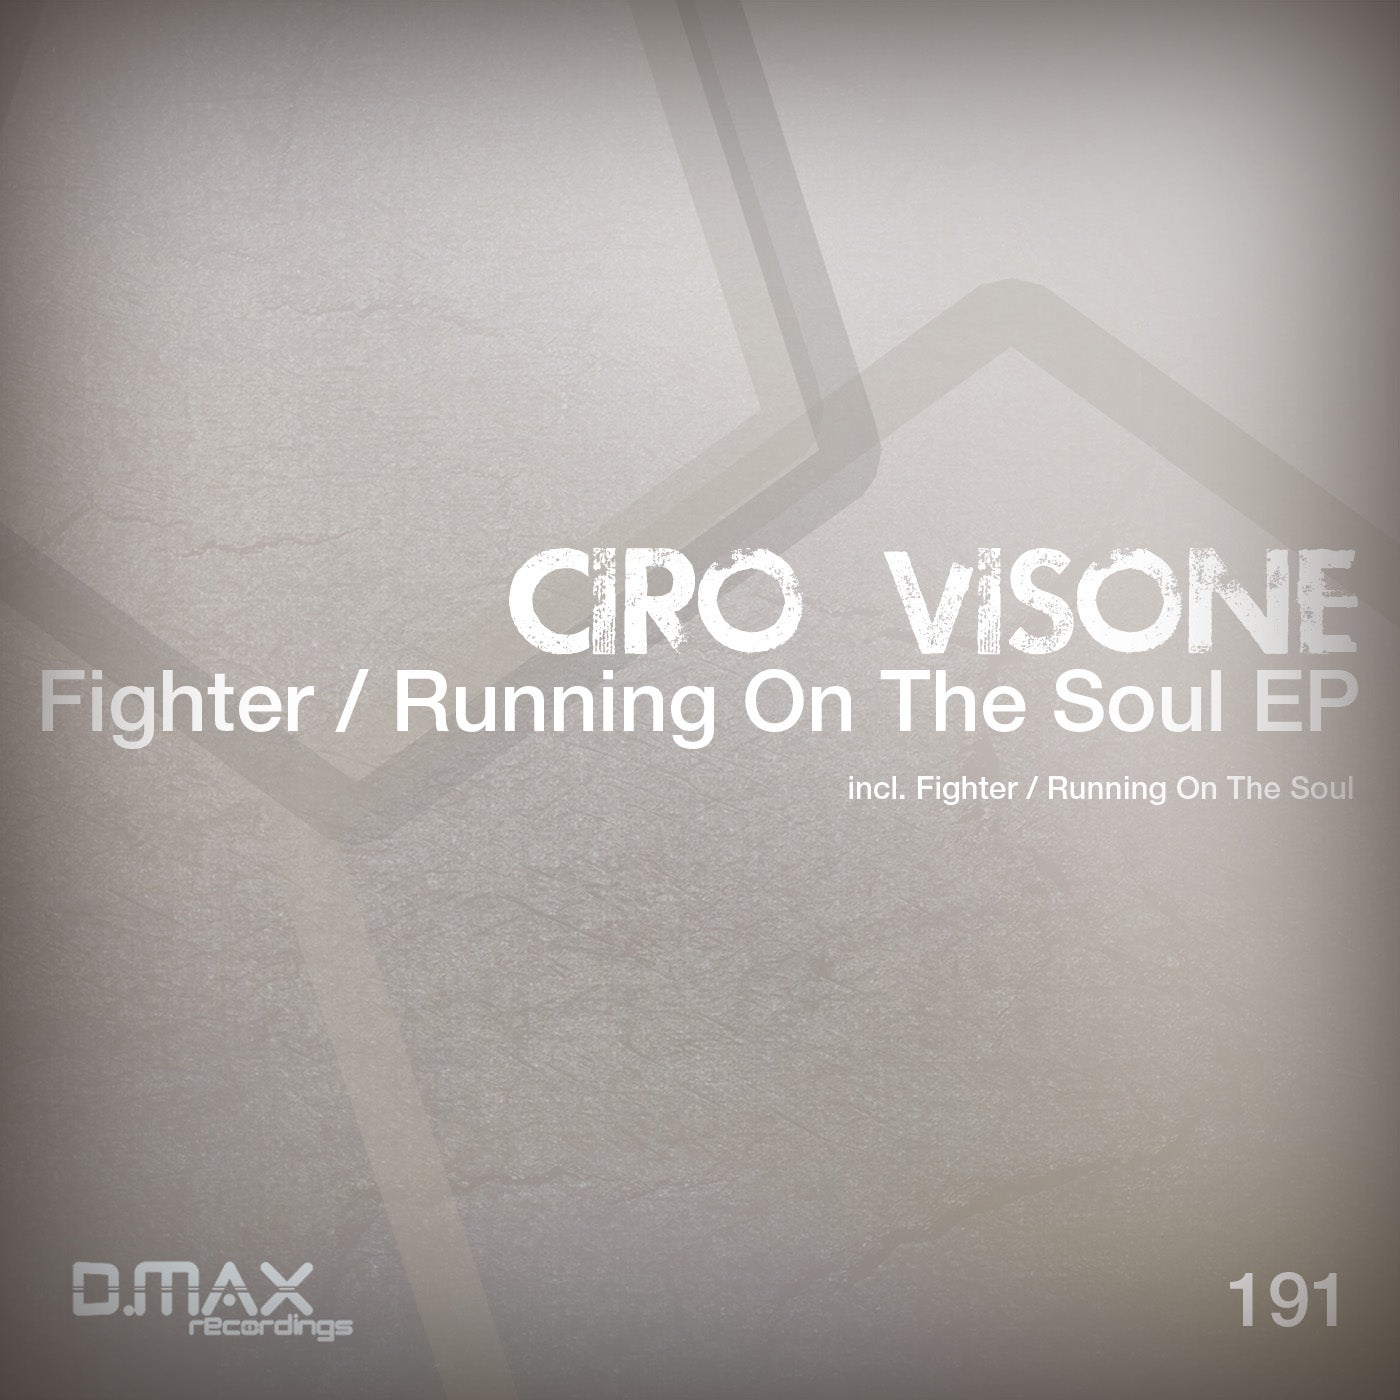 Fighter / Running On The Soul EP